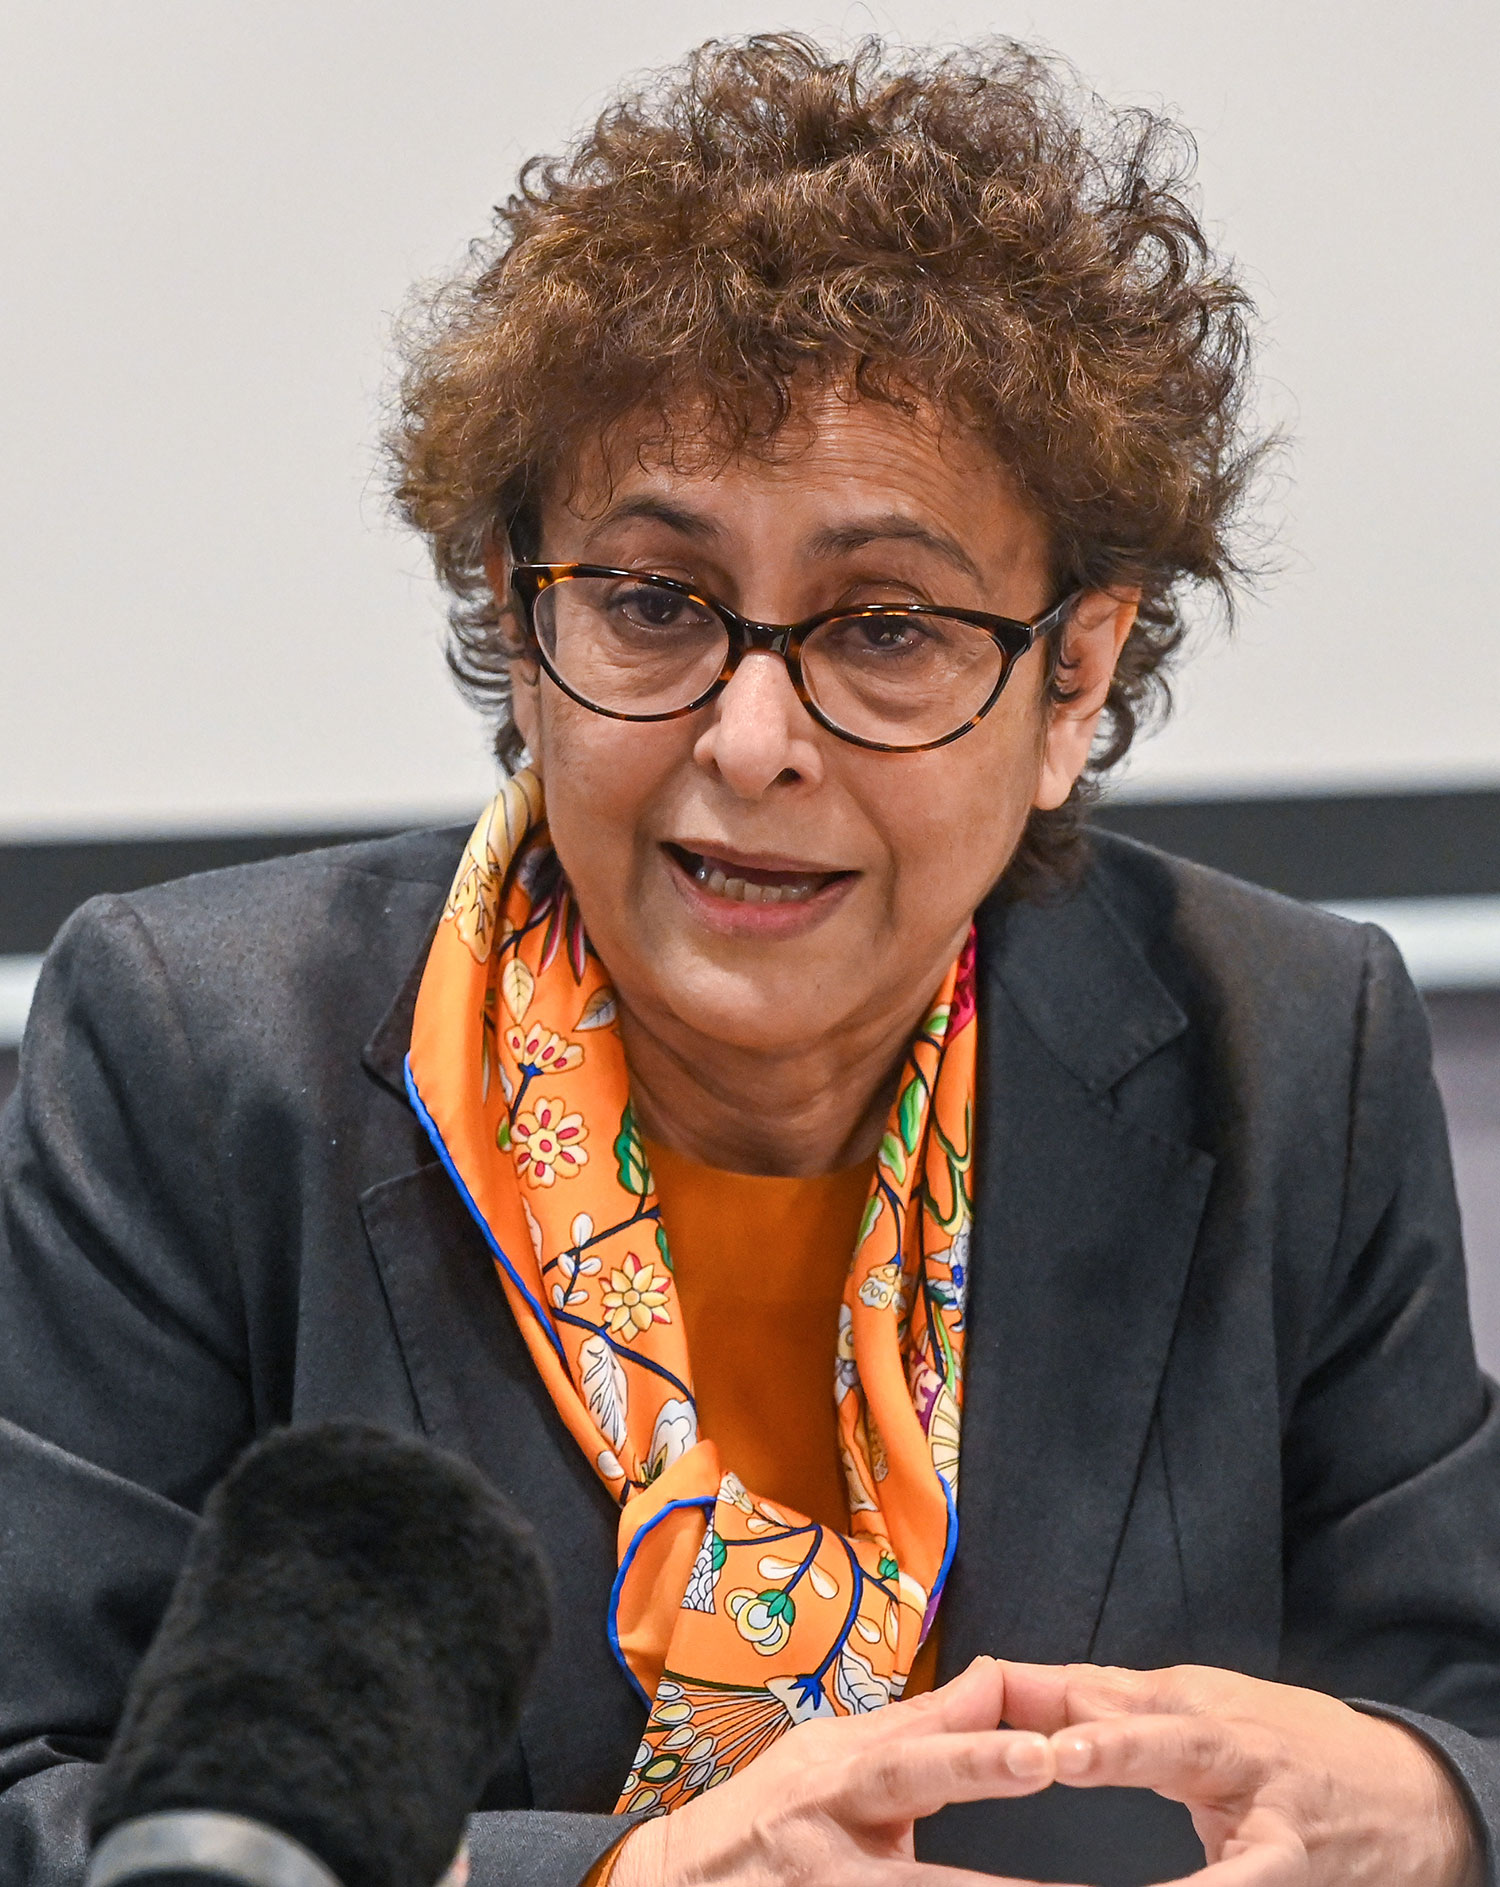 Ms. Irene KHAN, UN Special Rapporteur on freedom of opinion and expression.